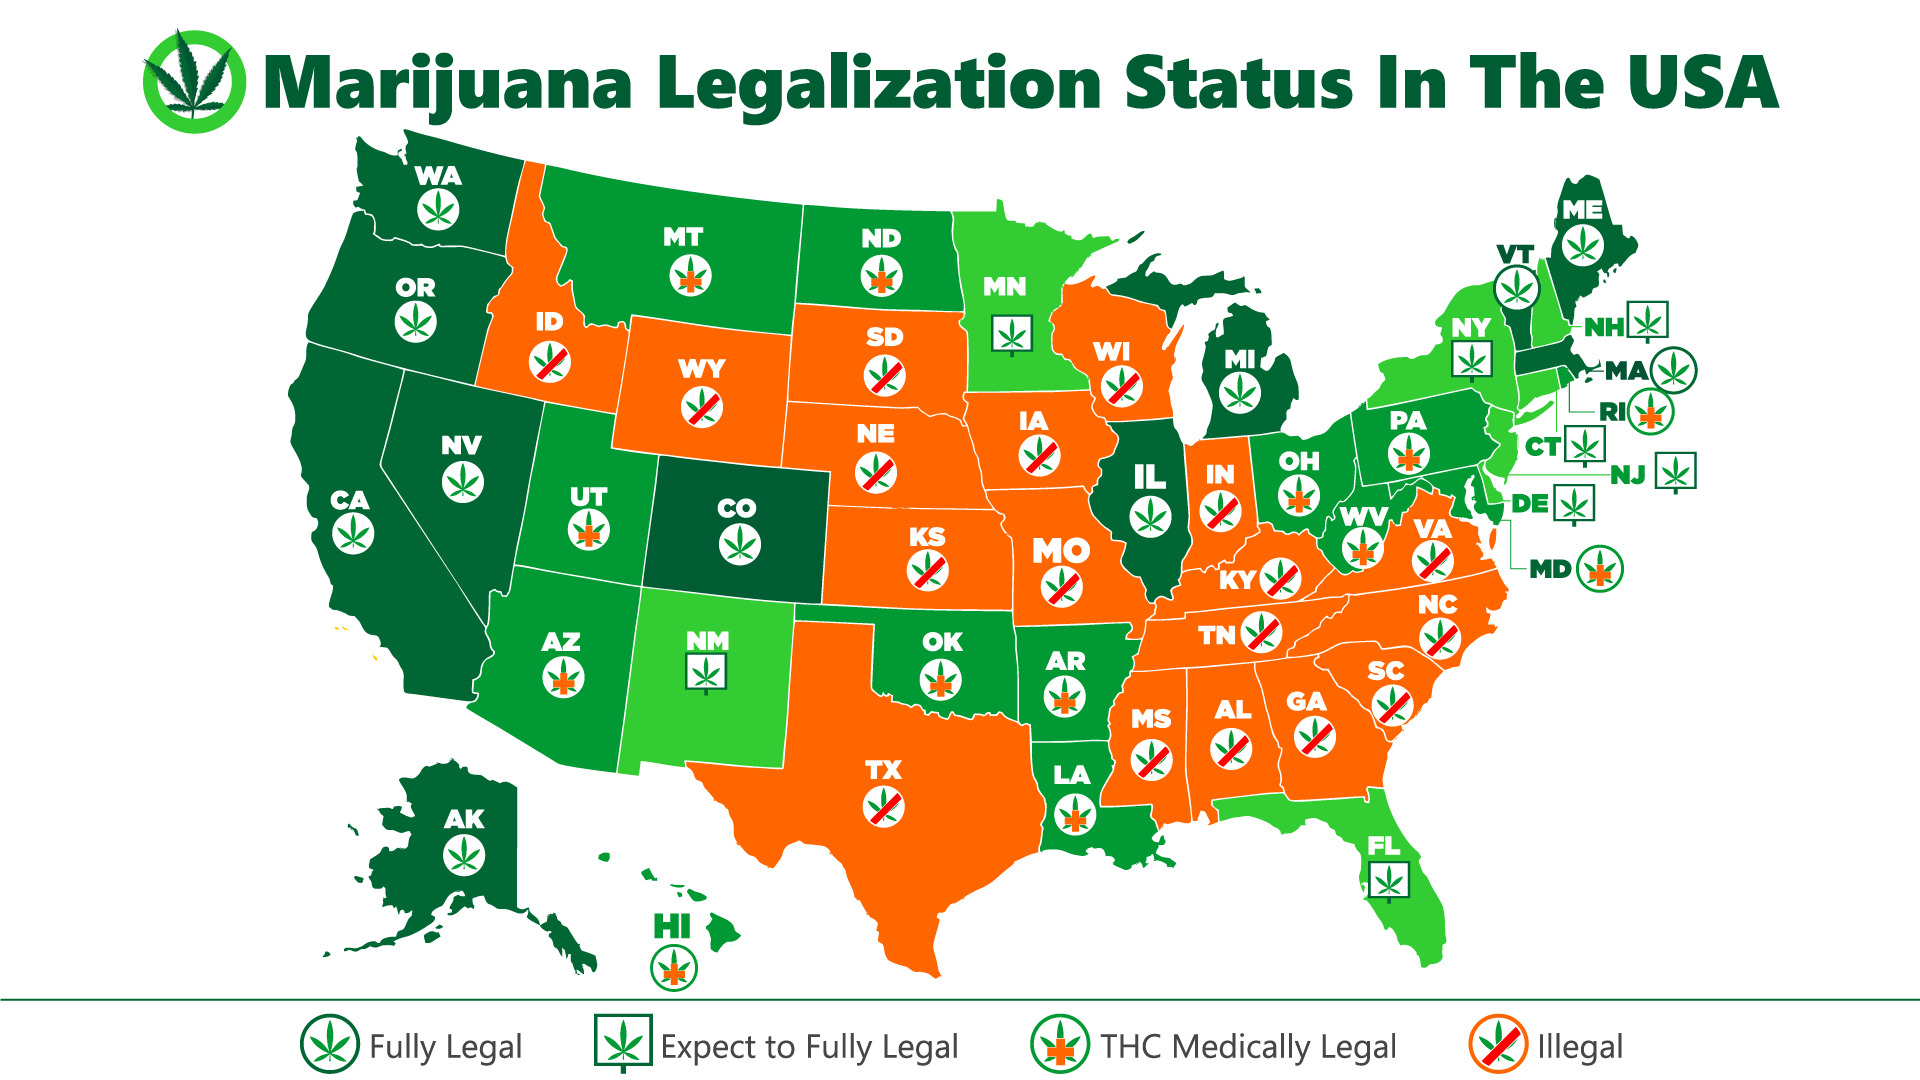 The State of Legalization